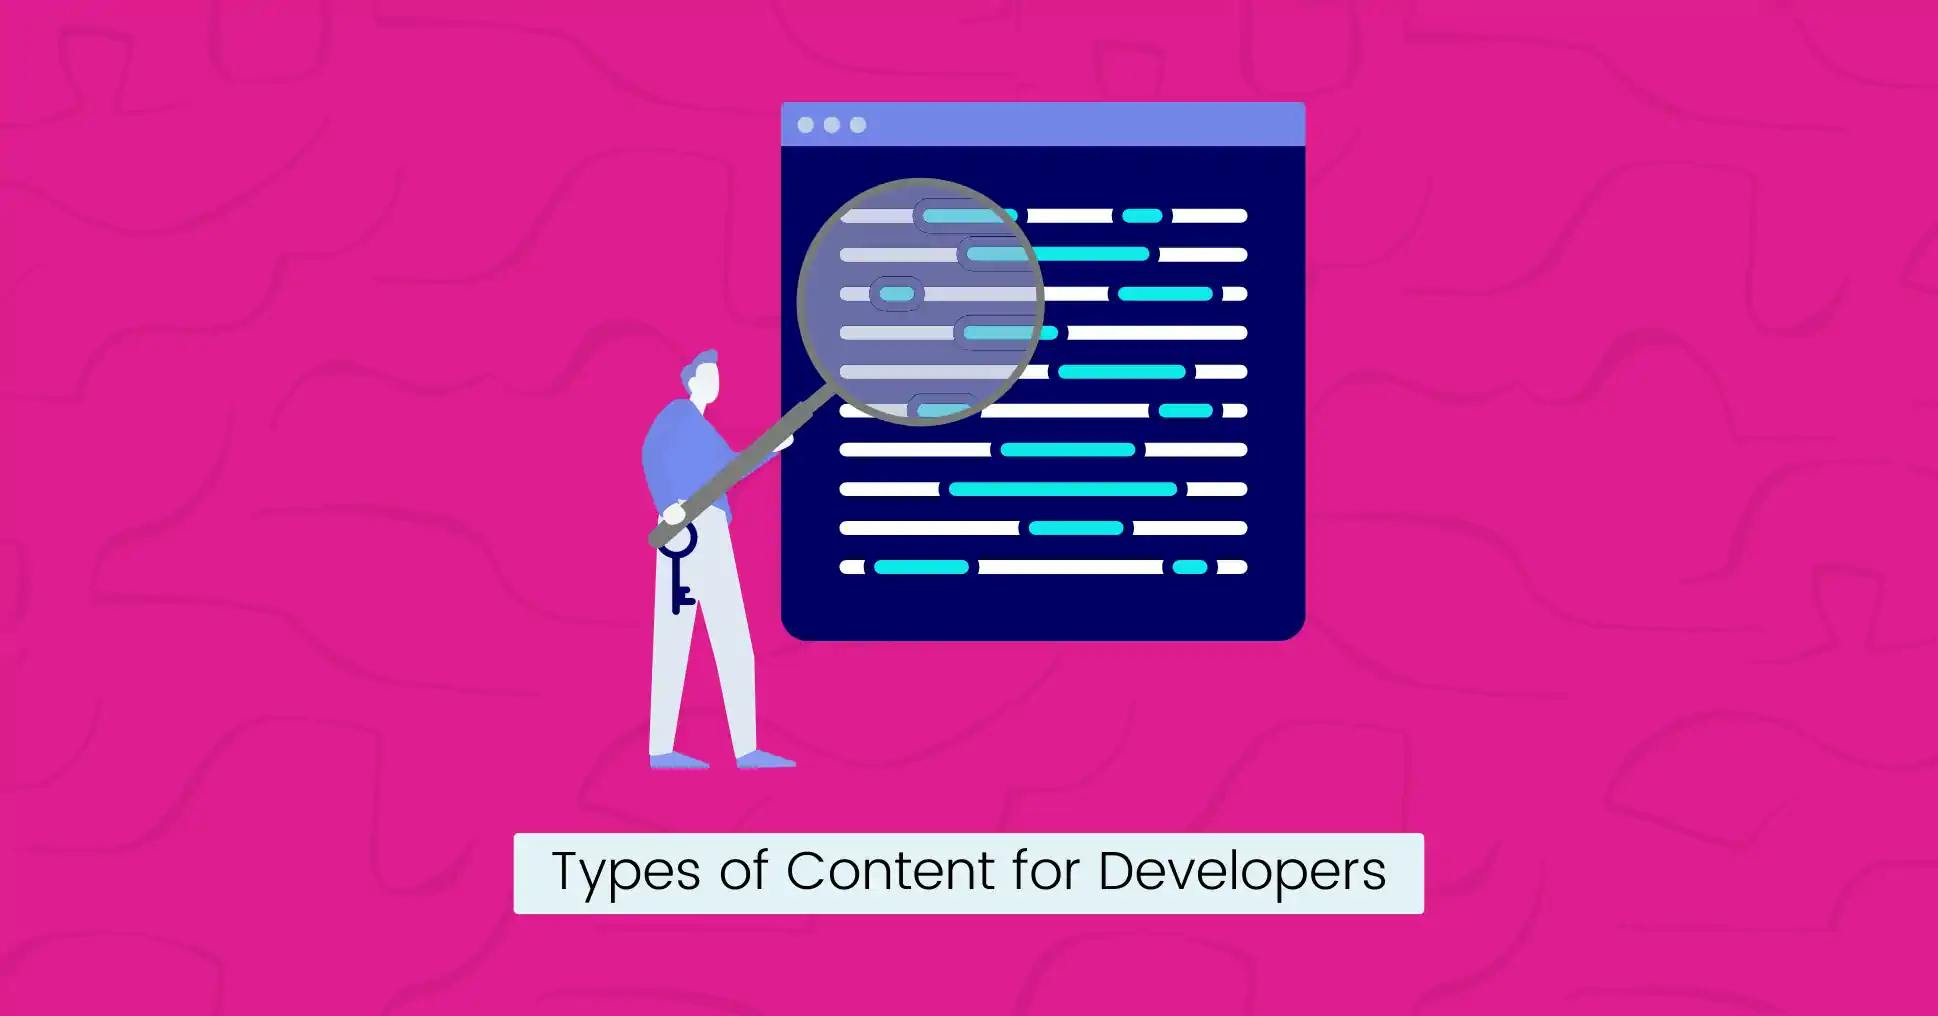 Types of content for developers